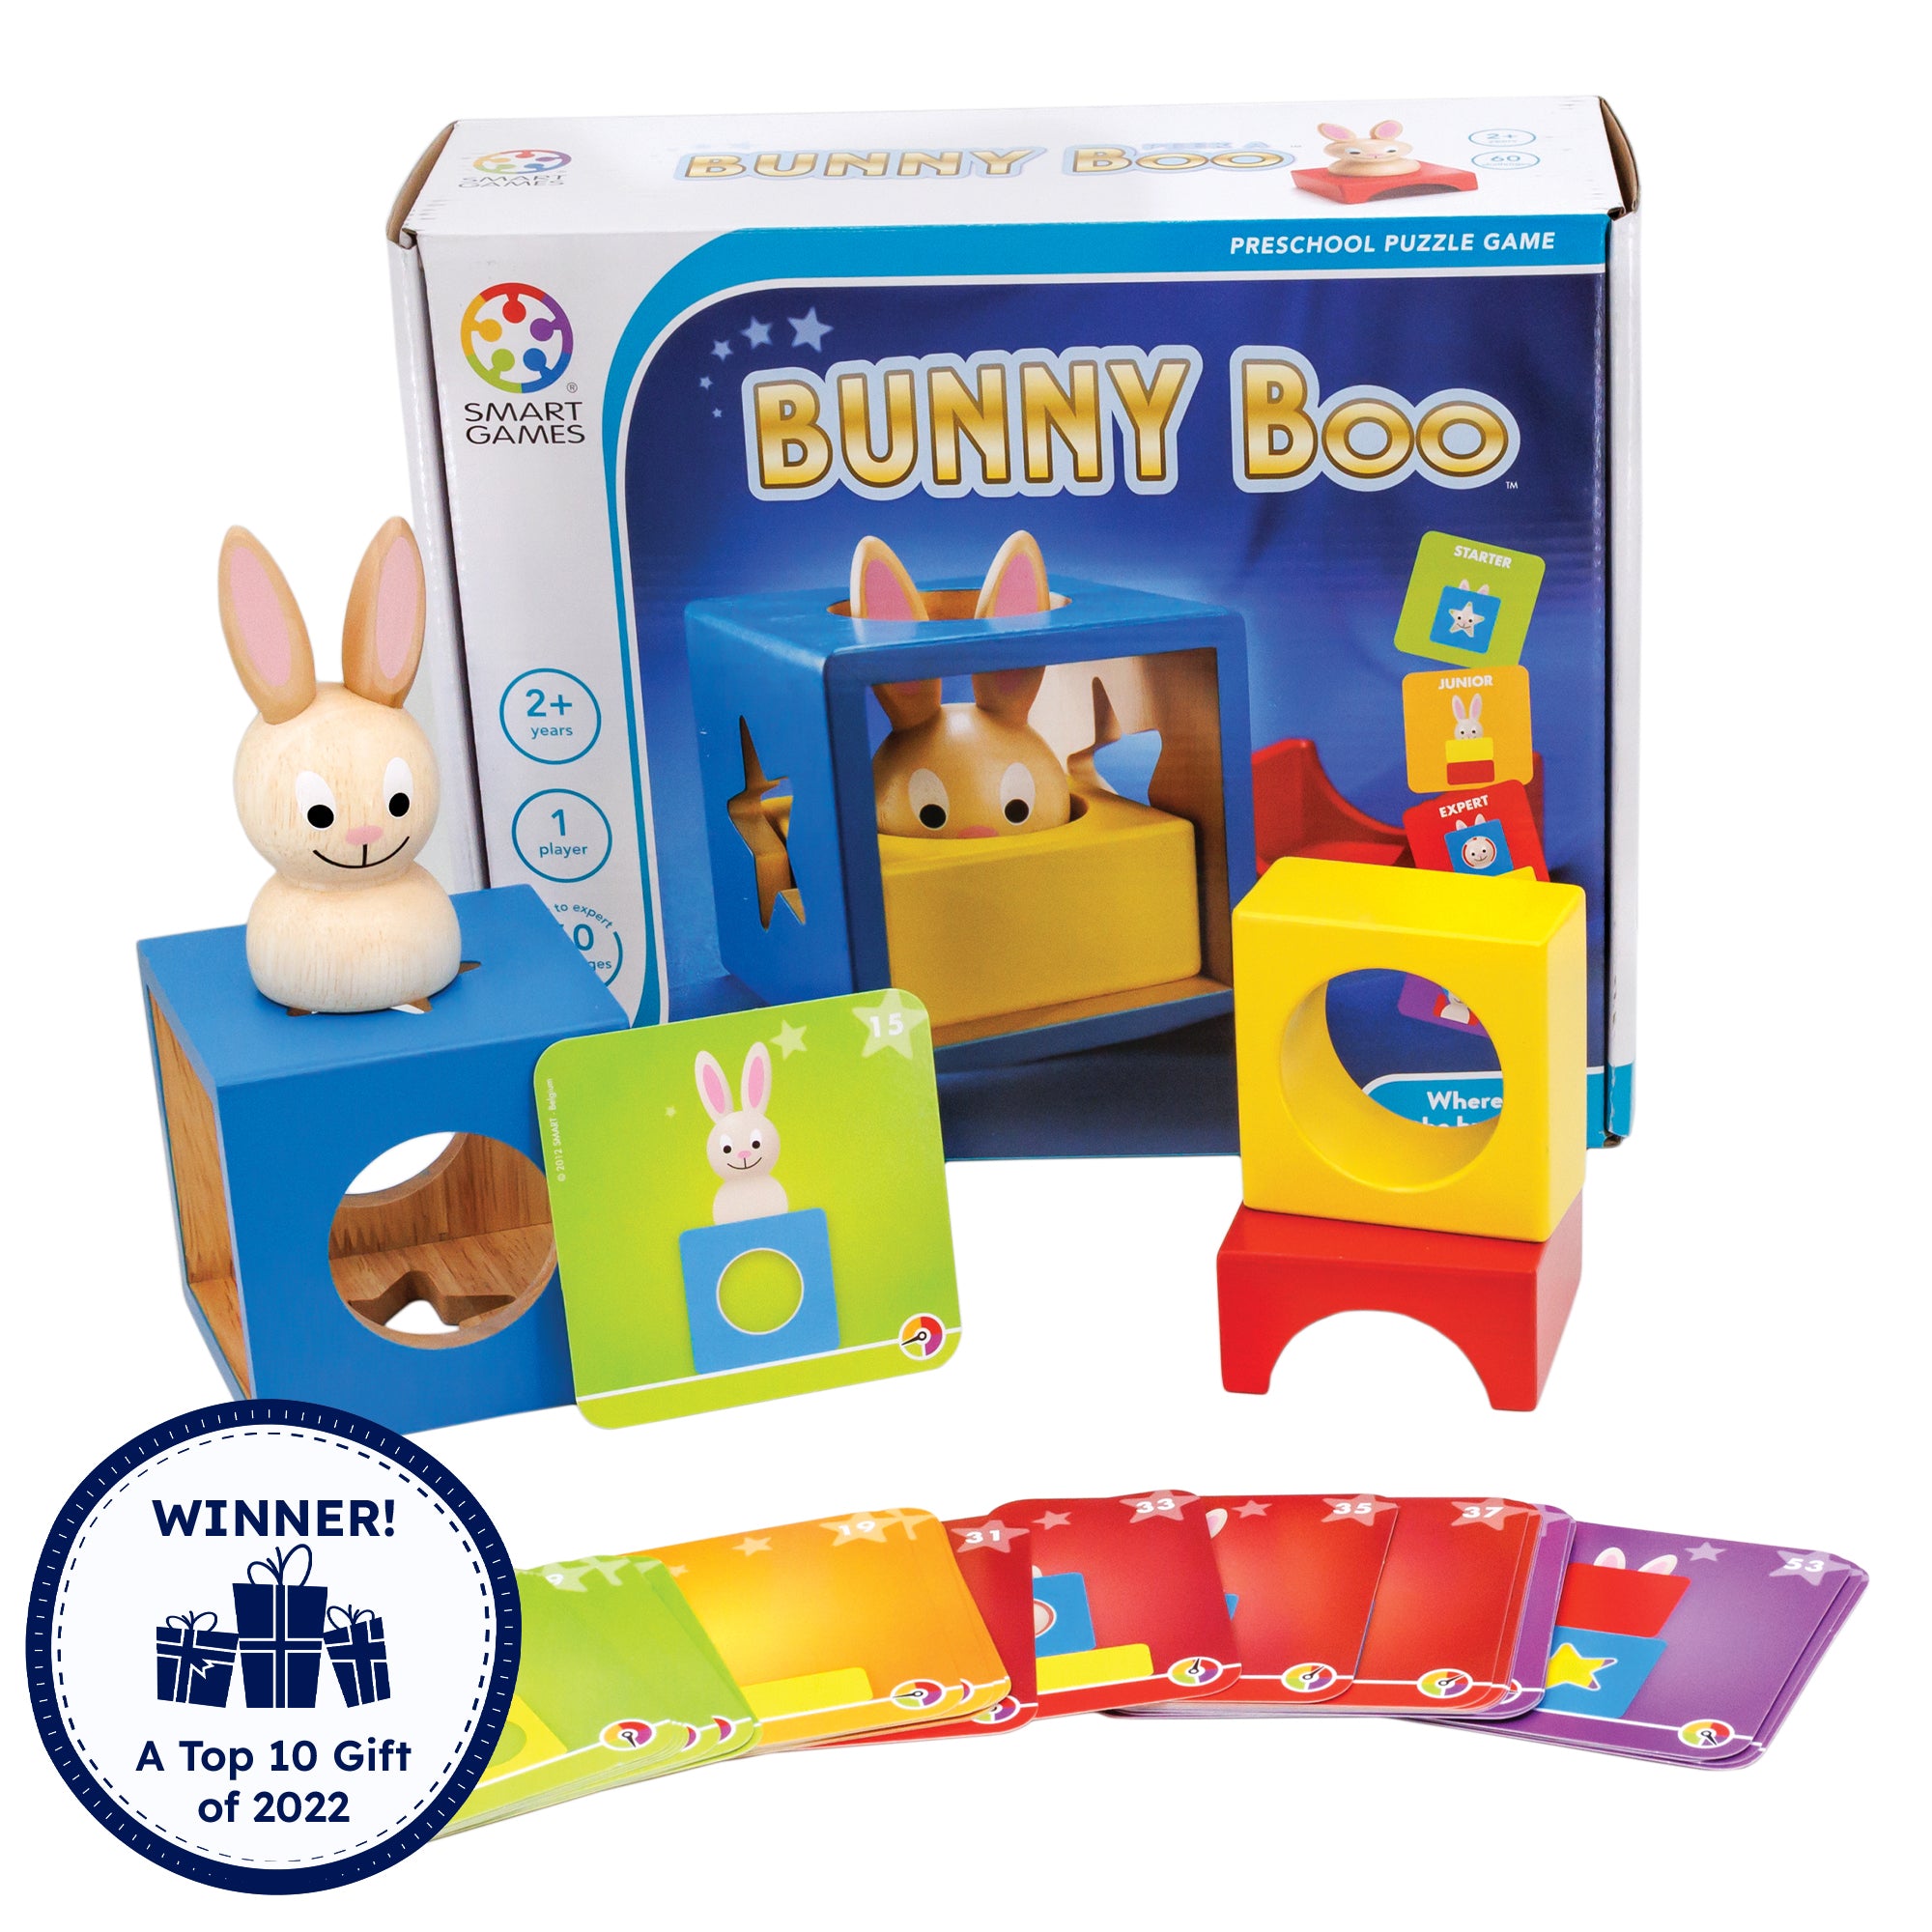 Bunny Boo game box with contents. In front of the box, is a hollow blue wood block with shapes cut out on the sides with a wooden bunny piece on top and a challenge card propped up against it. To the right are a yellow piece with a hollow circle through the middle and a red piece that shows a half circle piece cut out of the middle. There are challenge cards fanned out along the bottom in many colors. There is a badge reading “Winner! A top 10 gift of 2022” in the bottom-left.